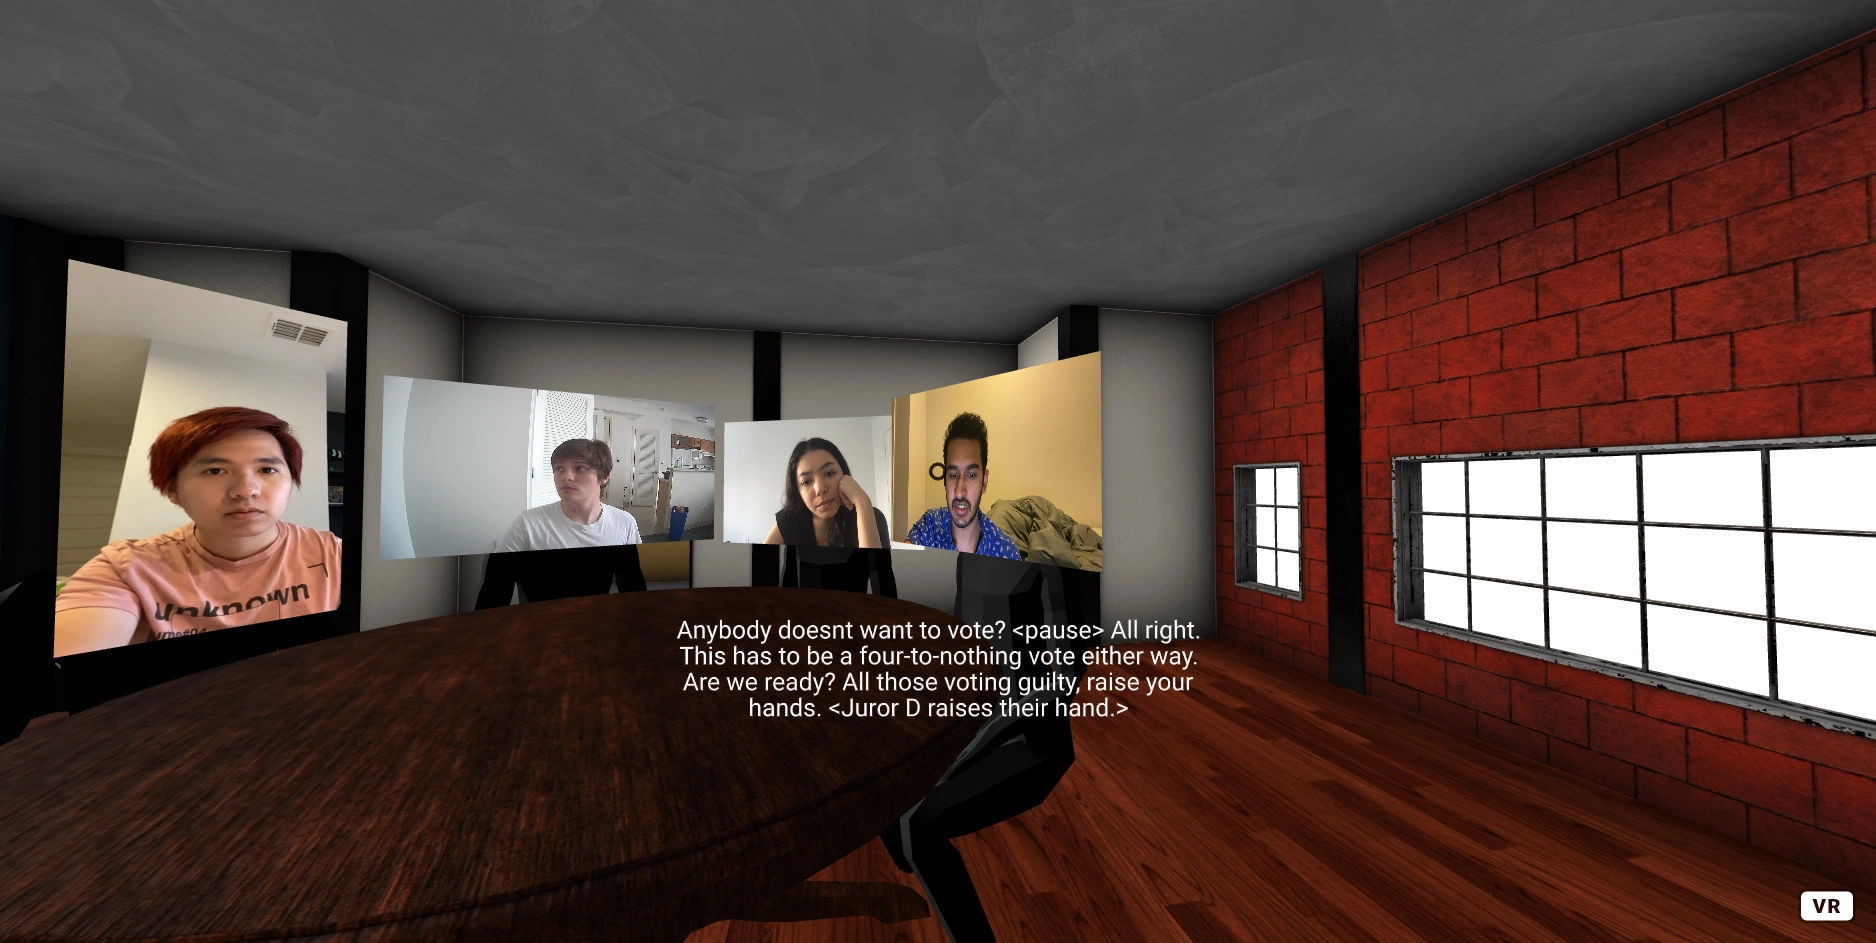 The preliminary prototype for this project, displaying 4 people around a table, with live, automatic captions displayed at the bottom of the screen.